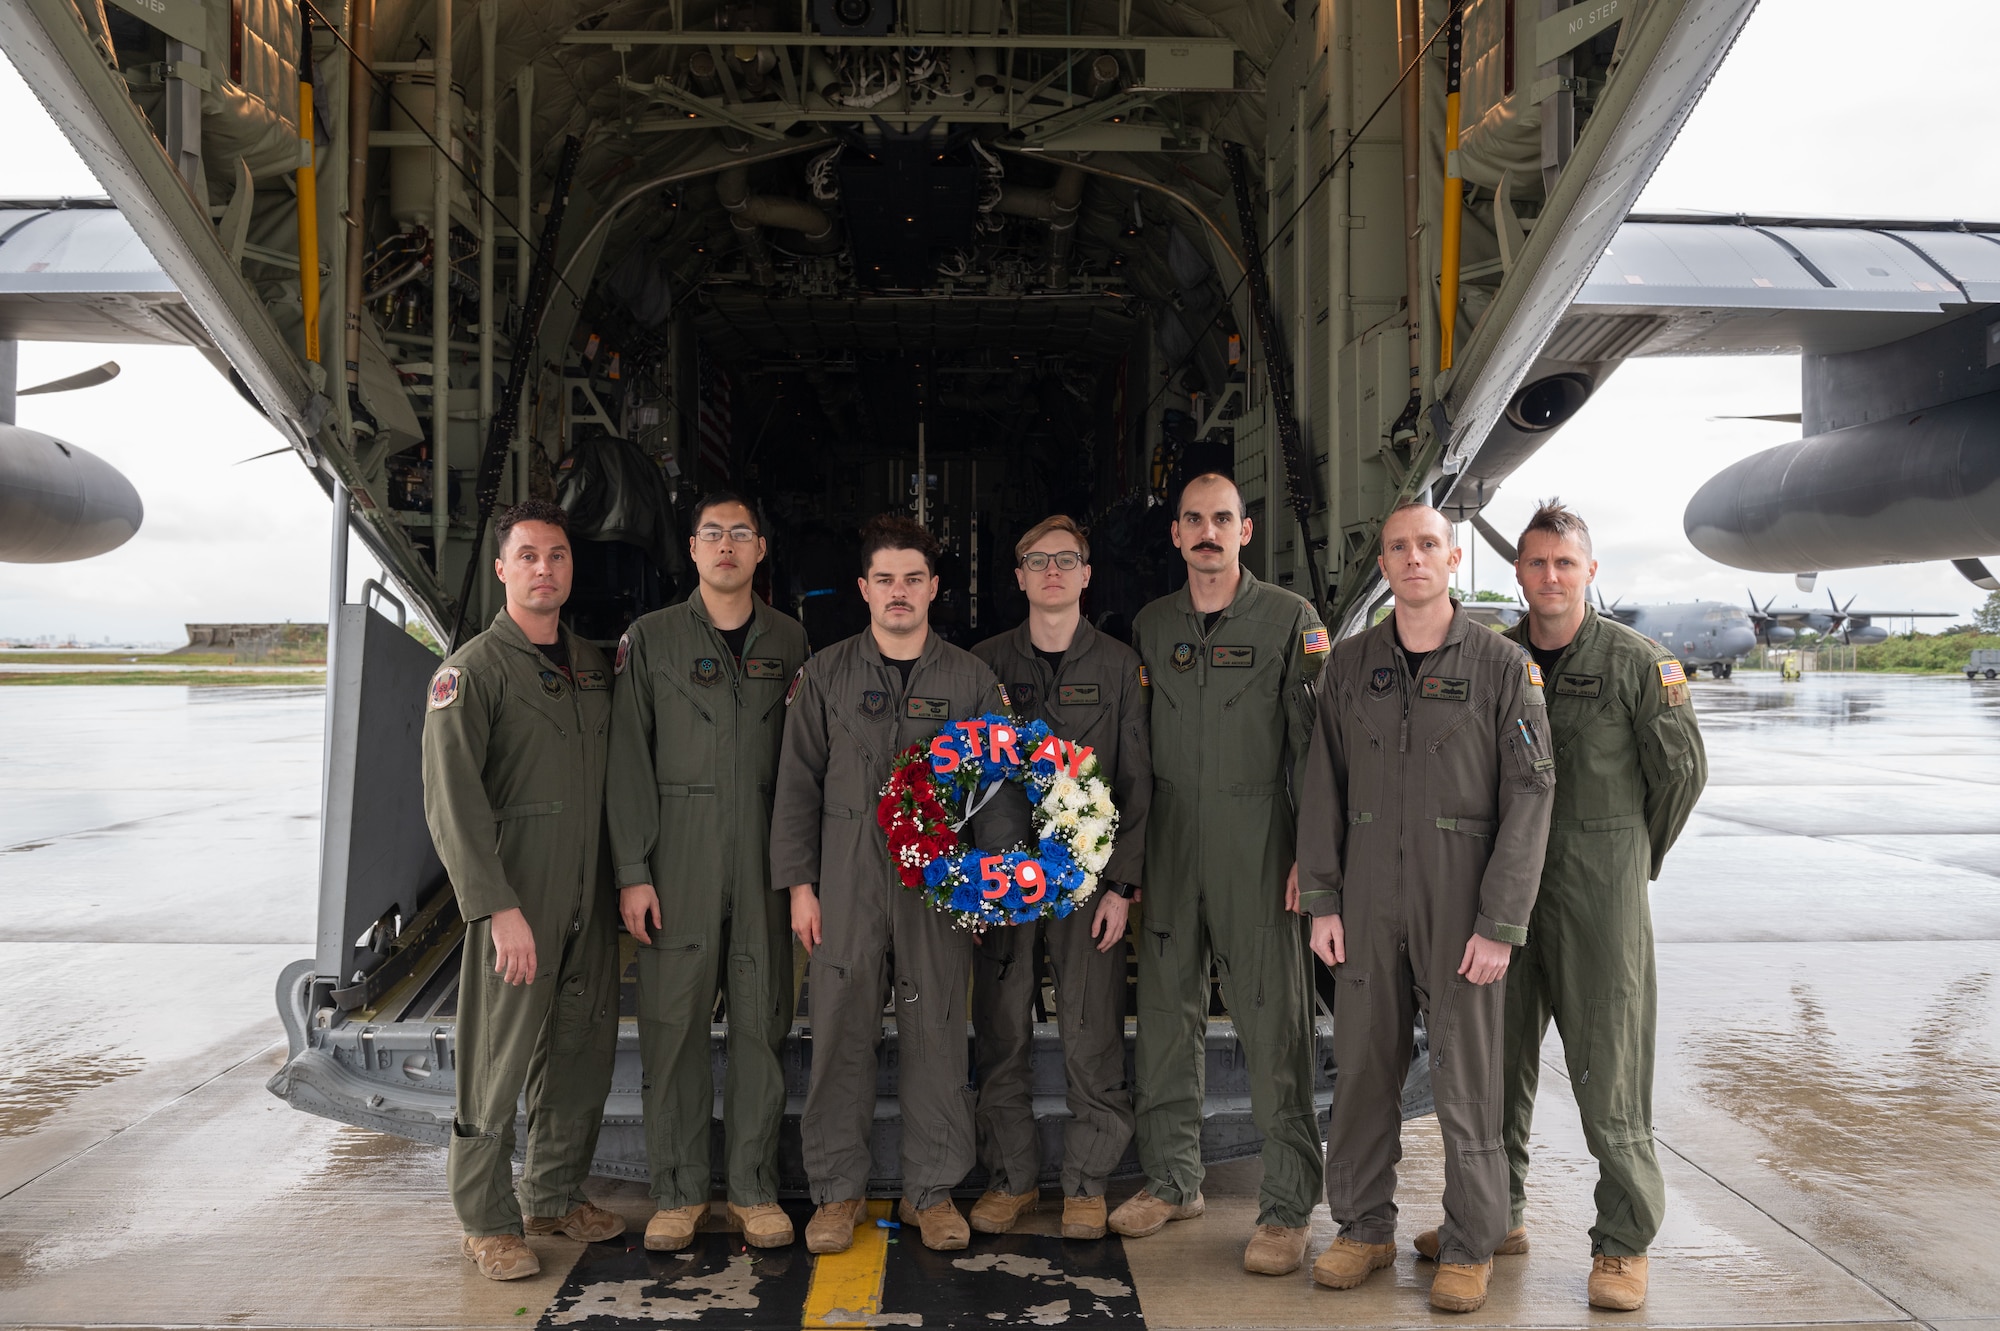 Airmen stand in front of an MC-130J with a STRAY 59 memorial wreath